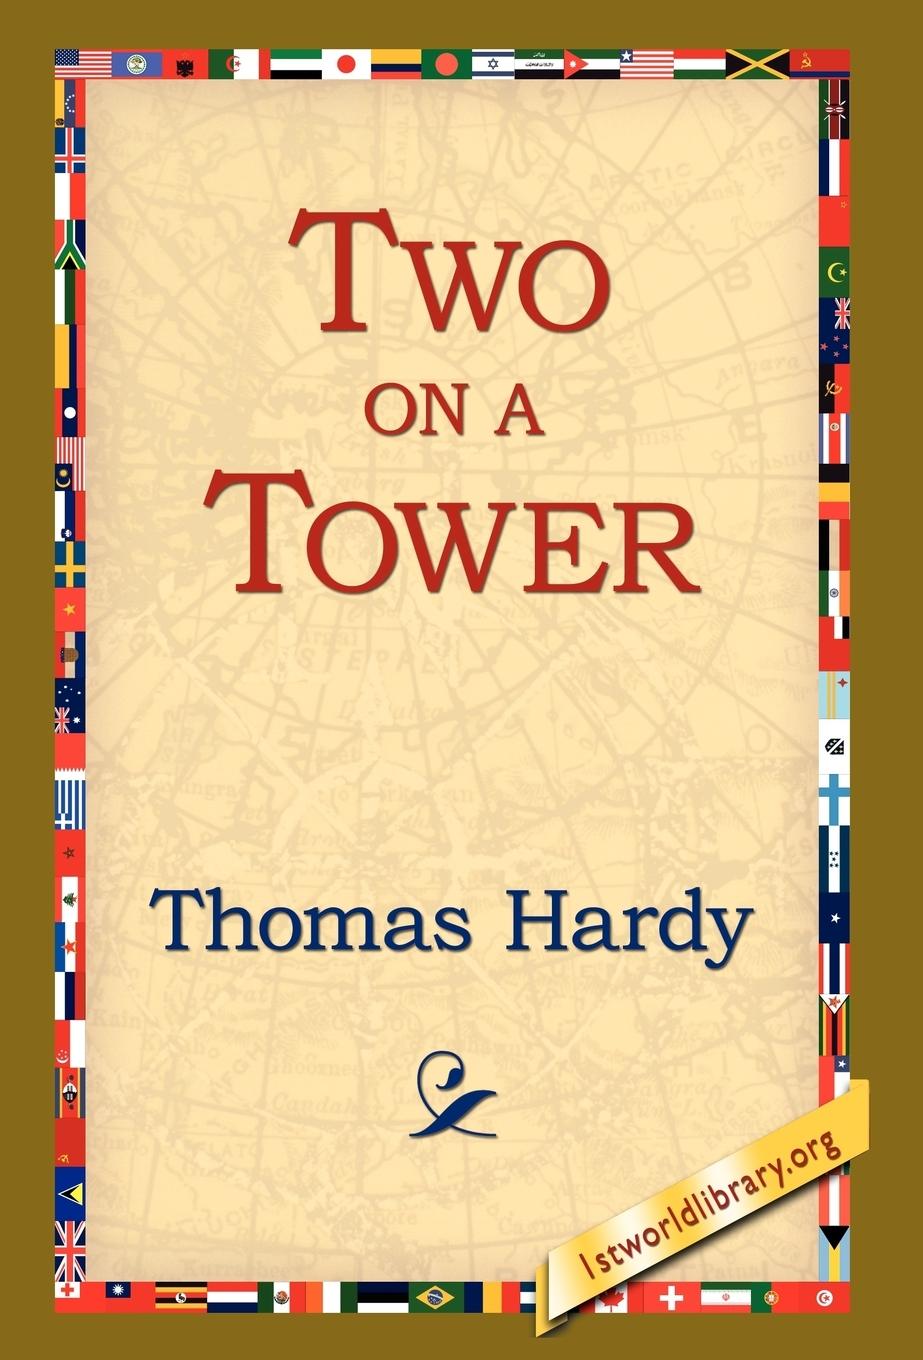 Two on a Tower - Hardy, Thomas